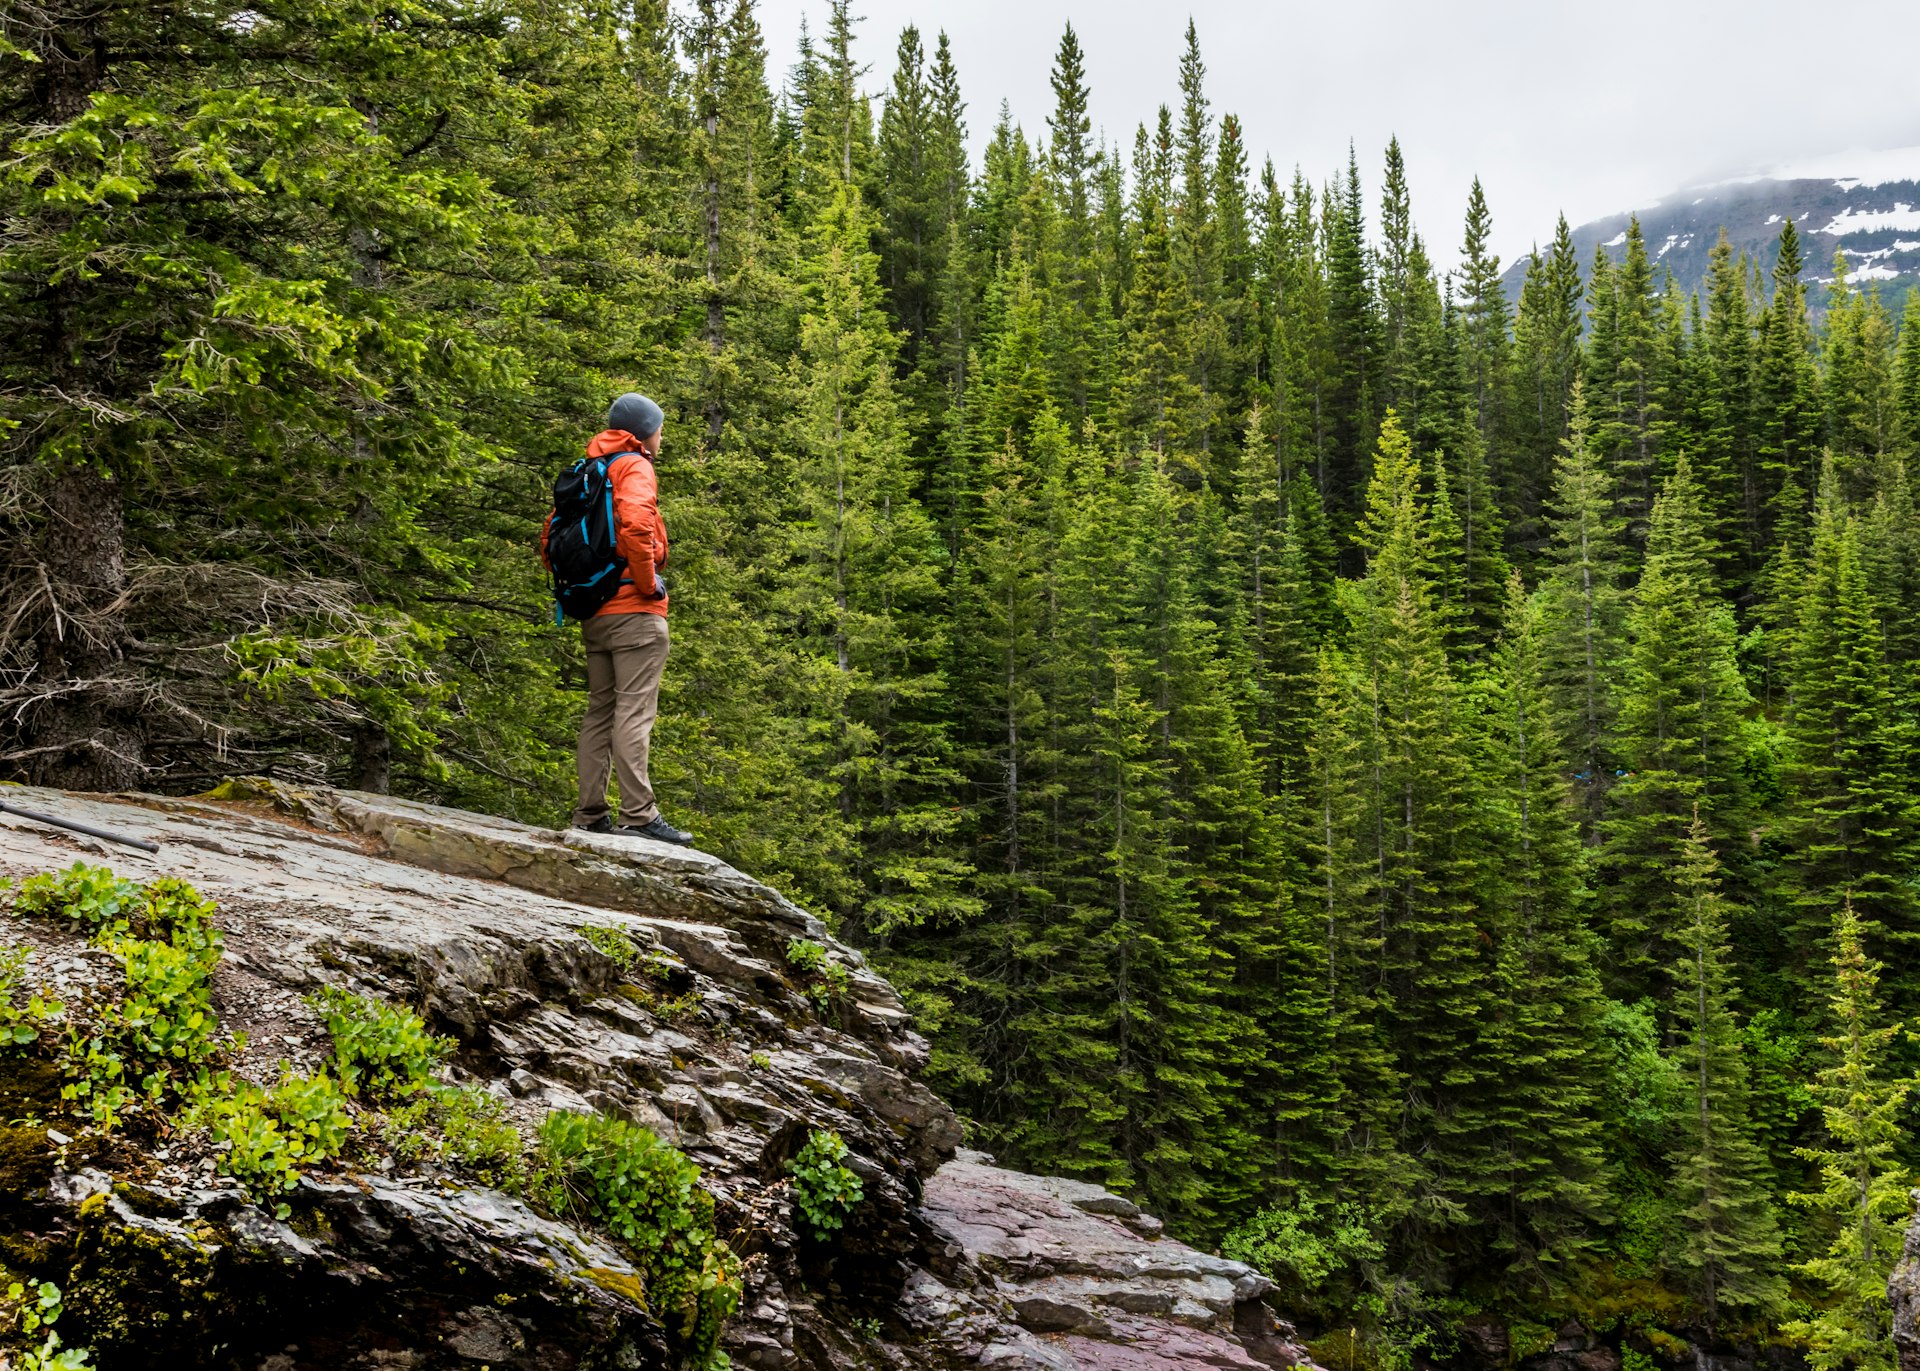 A male hiker stands on a rocky outcrop in the forest looking out at the view